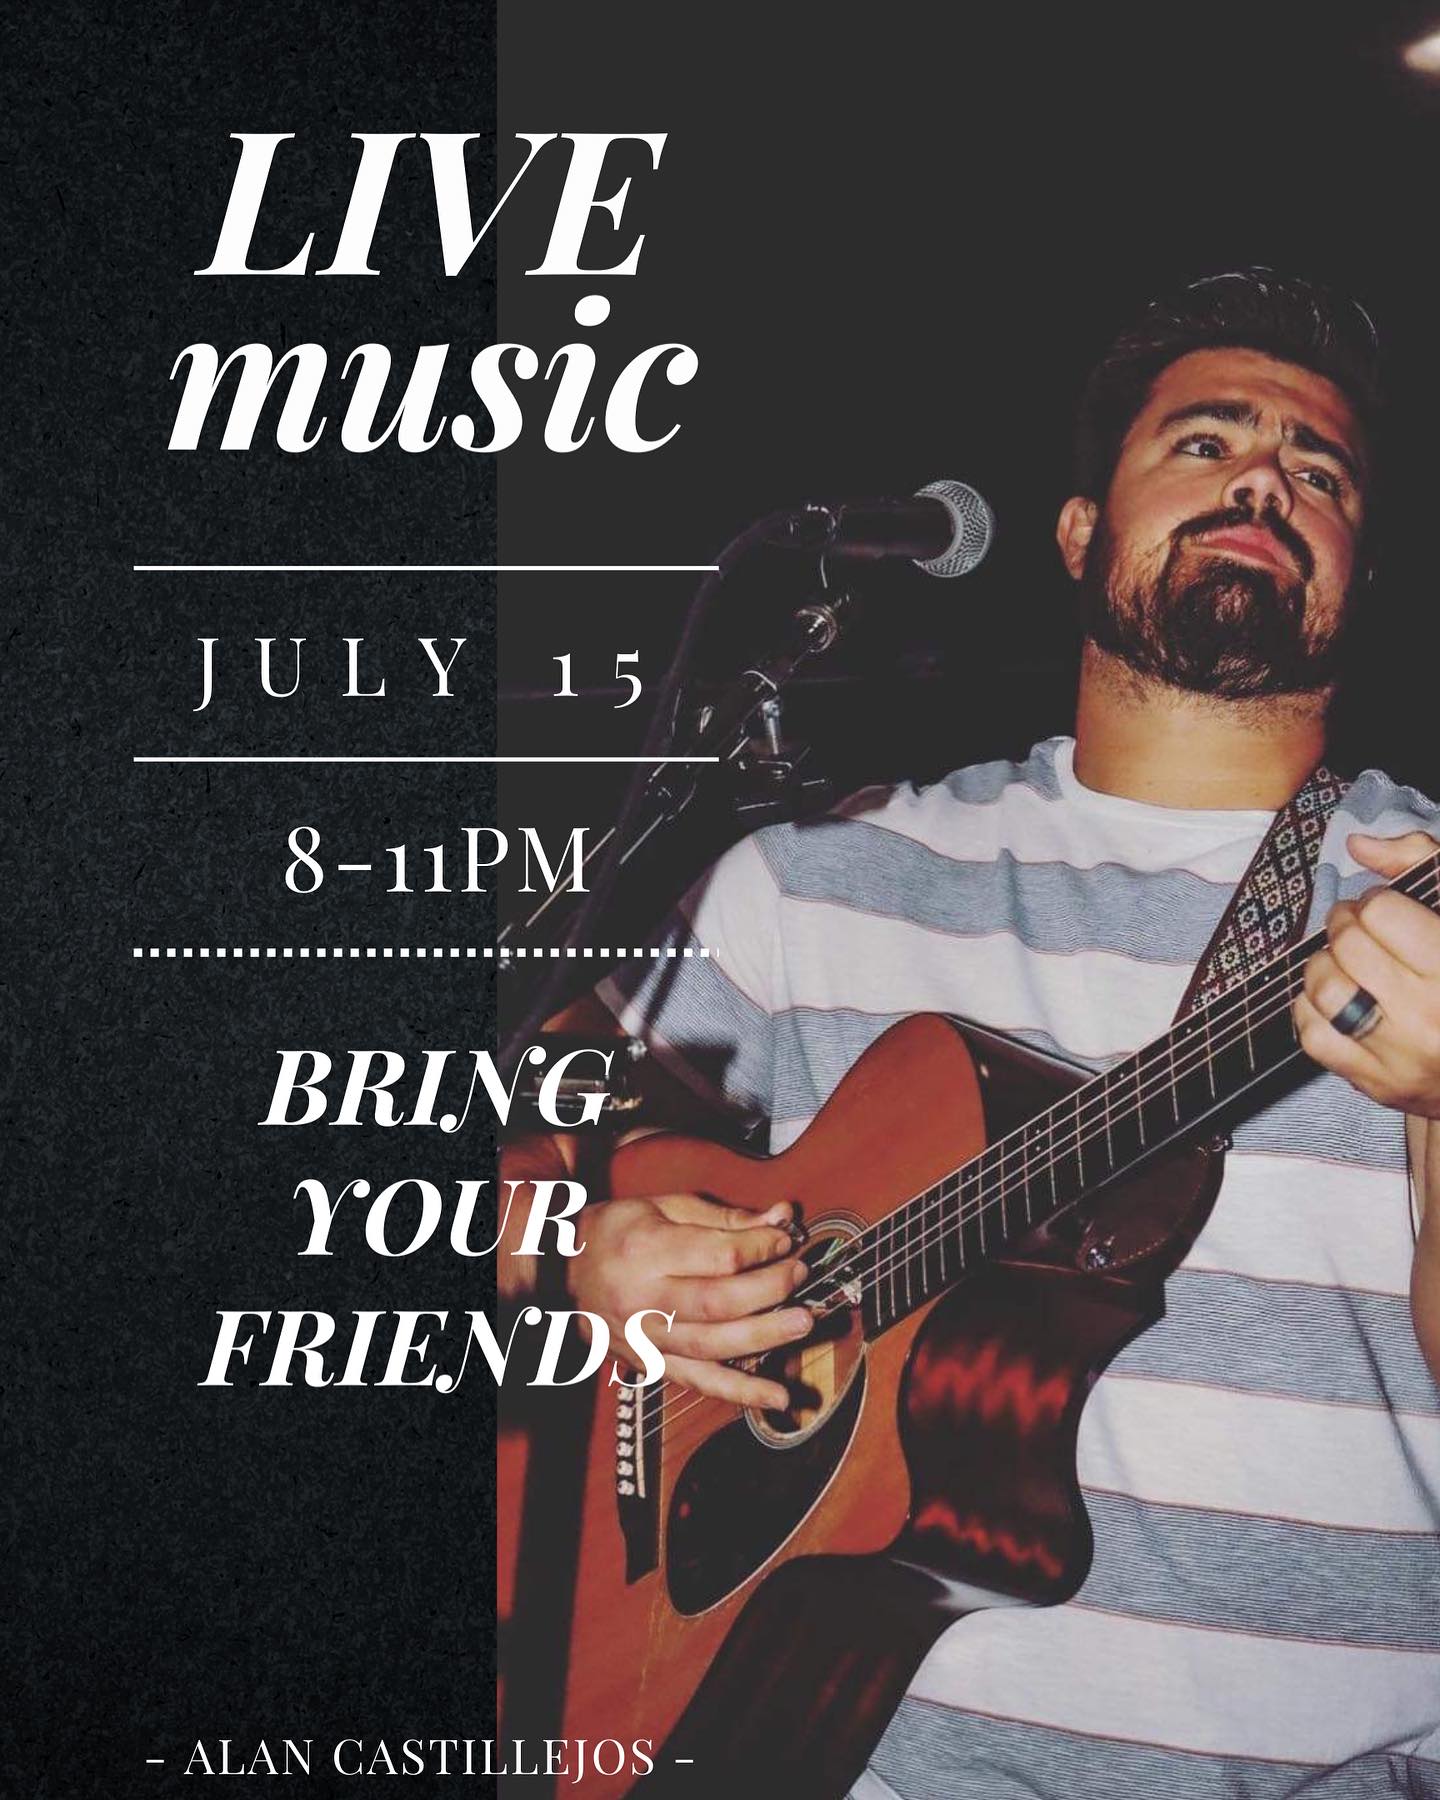 Live Music with Alan Castillejos at Tumbleweeds Bar in Odessa, TX